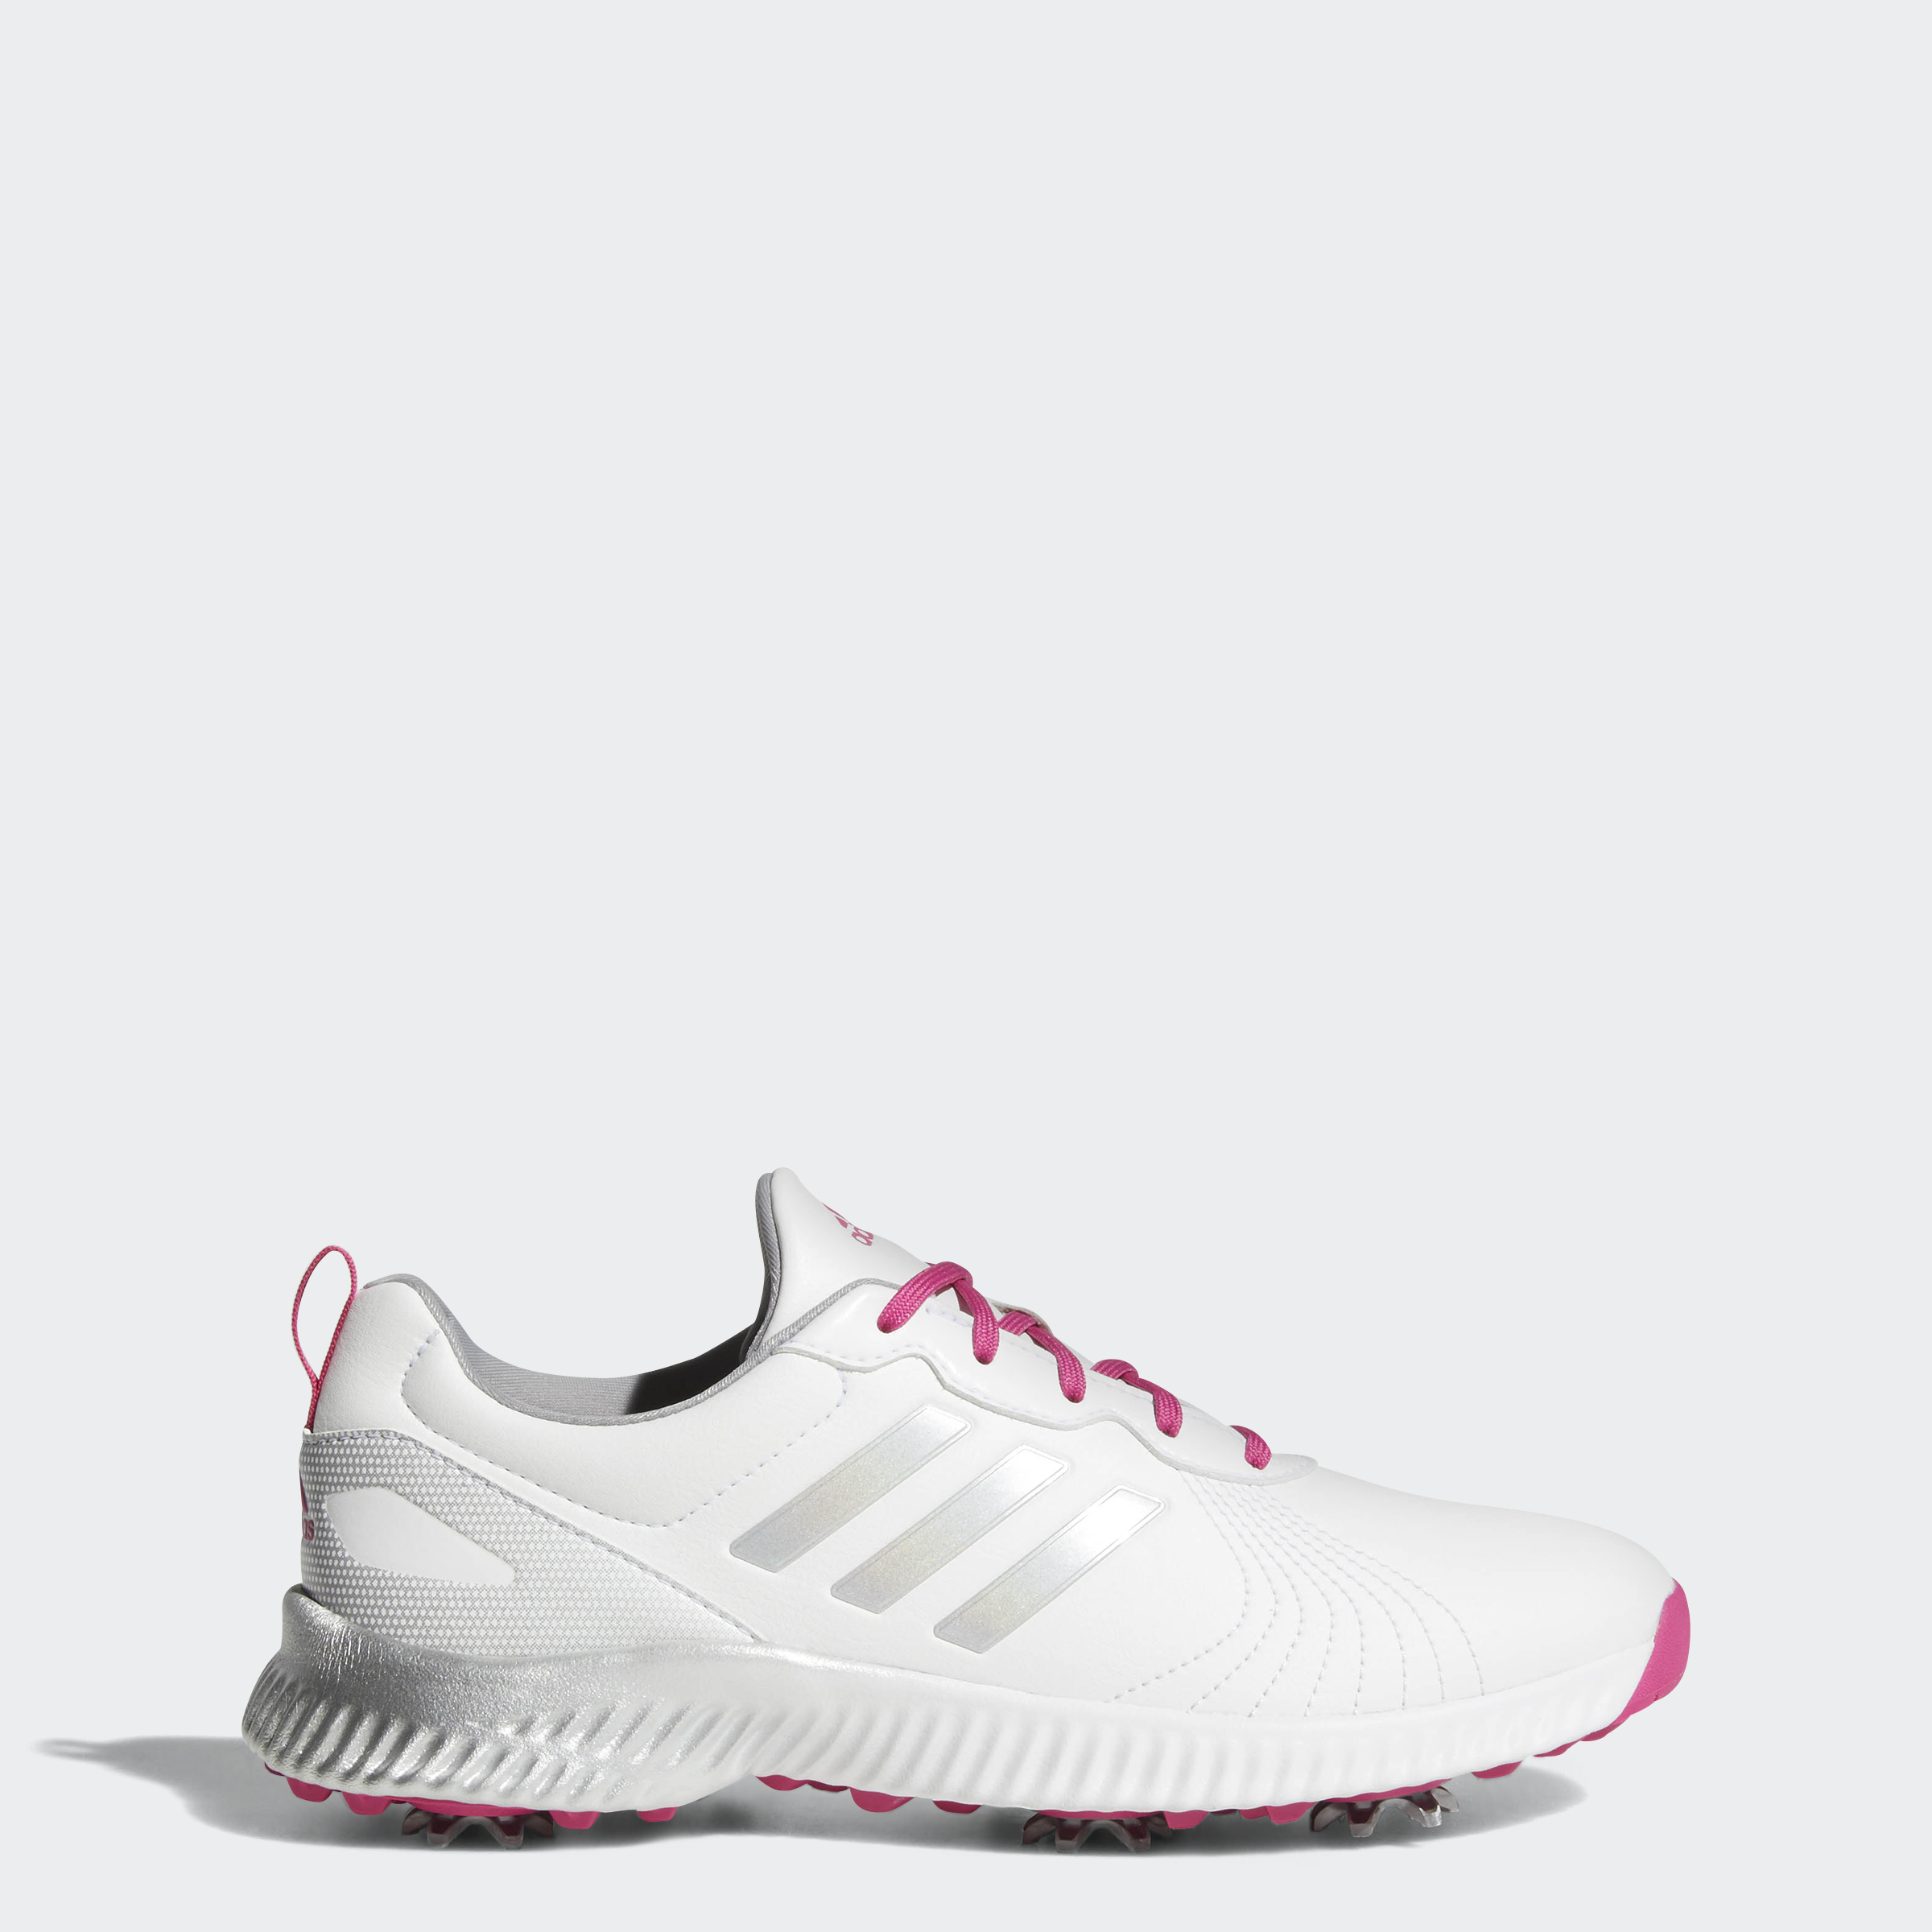 adidas bounce shoes womens